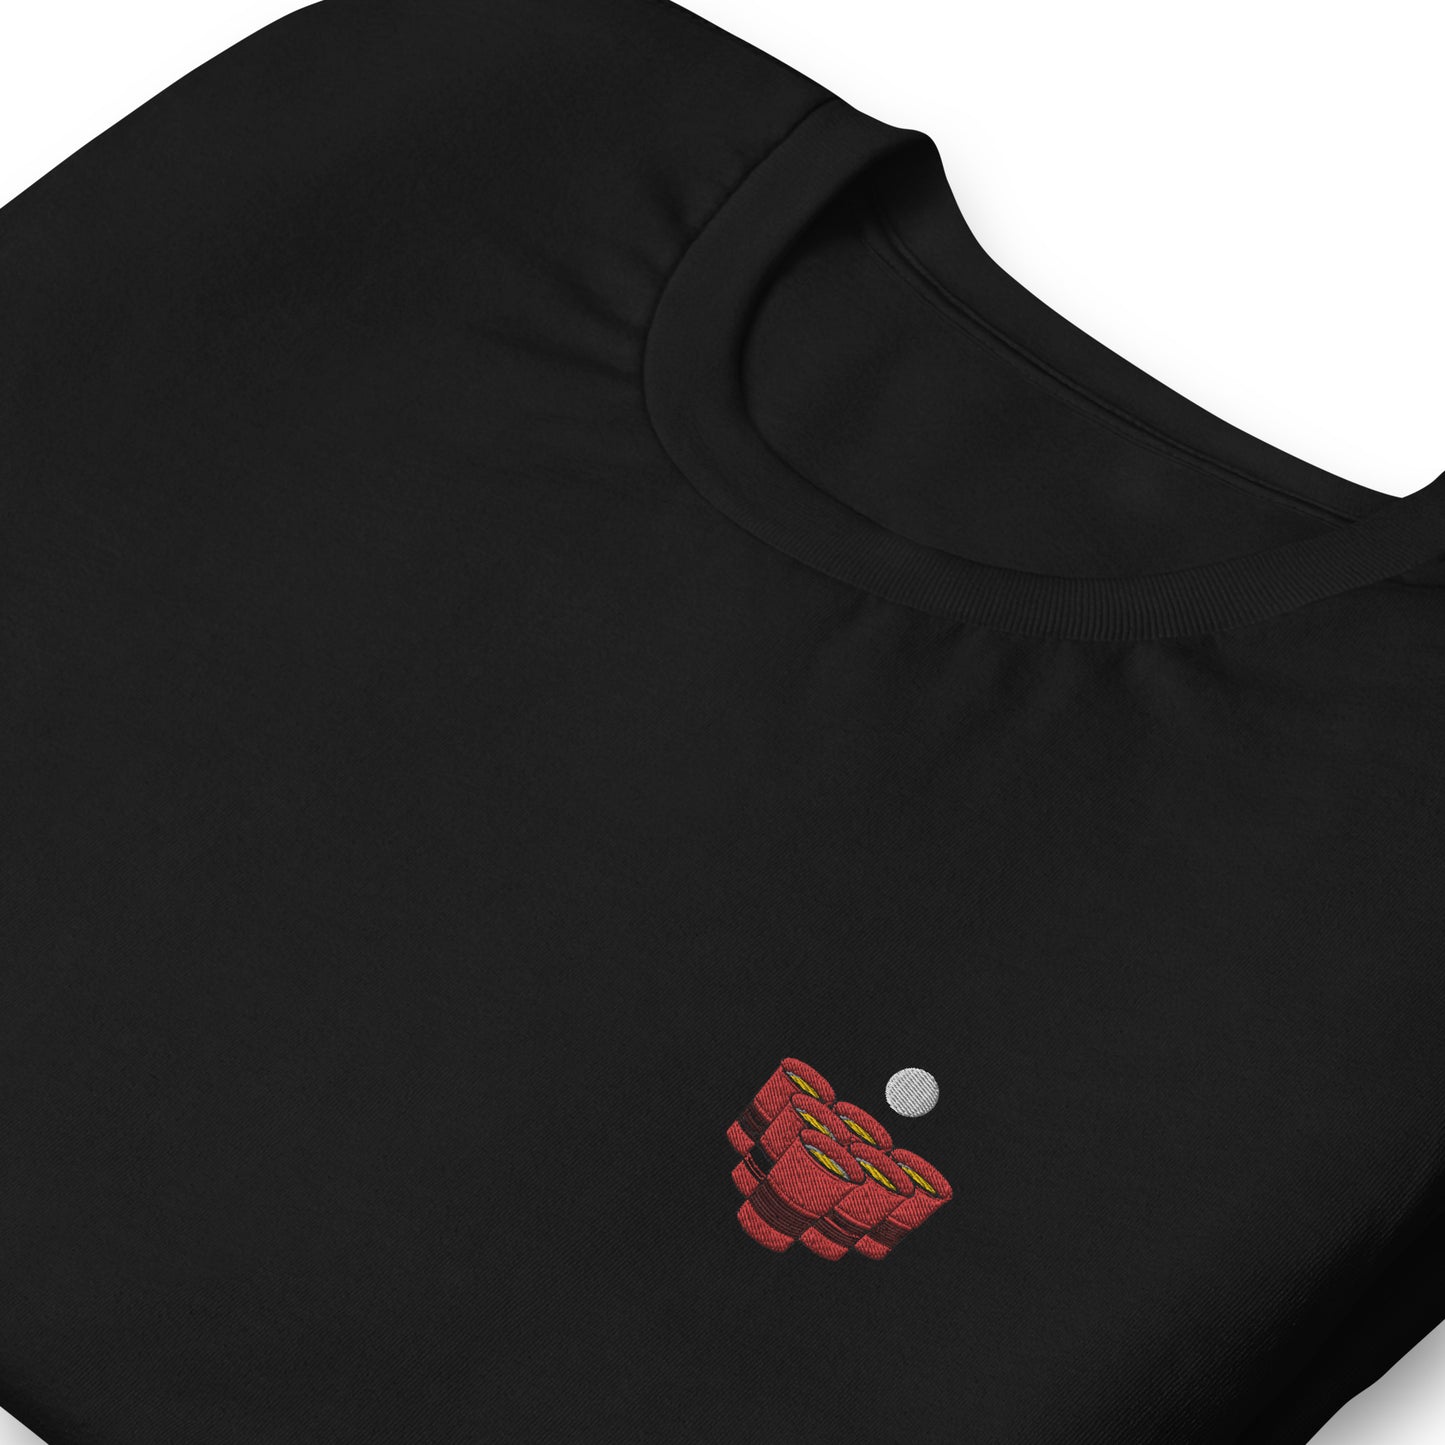 Beerpong - embroidered T-shirt